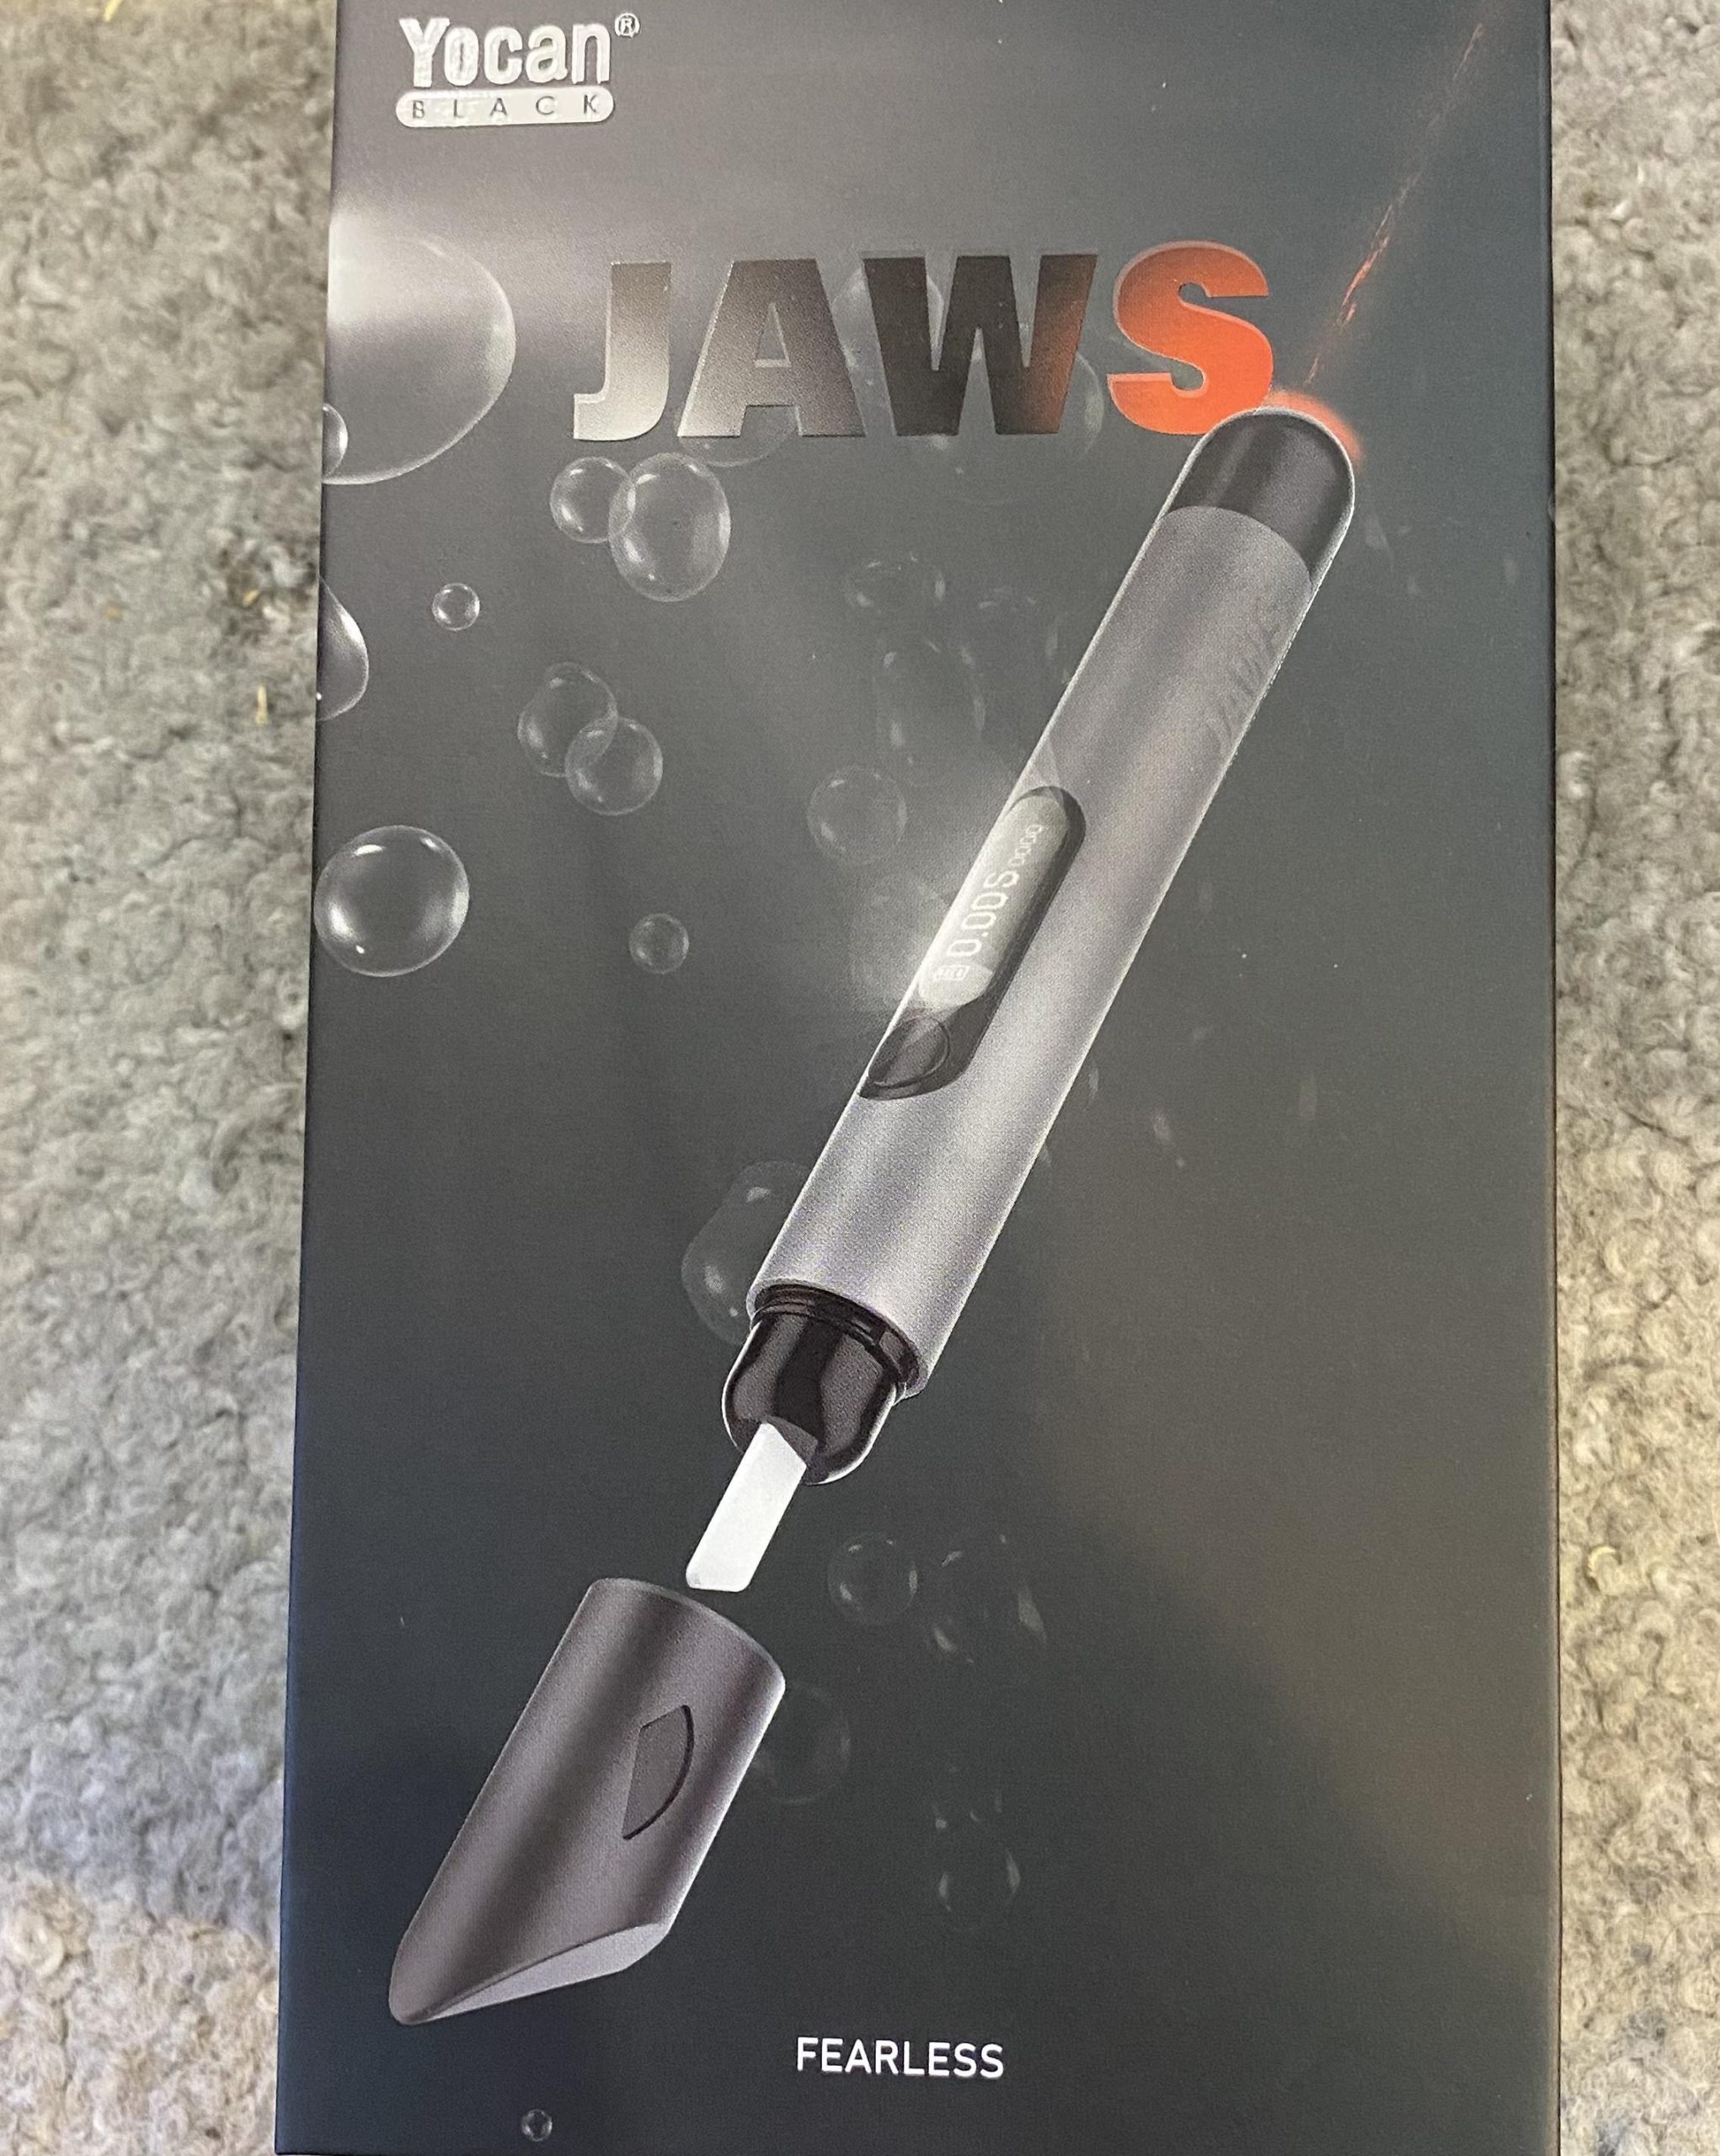 Yocan Hot Knife Electric Dab Tool and Dab Thermometer: Jaws Silver